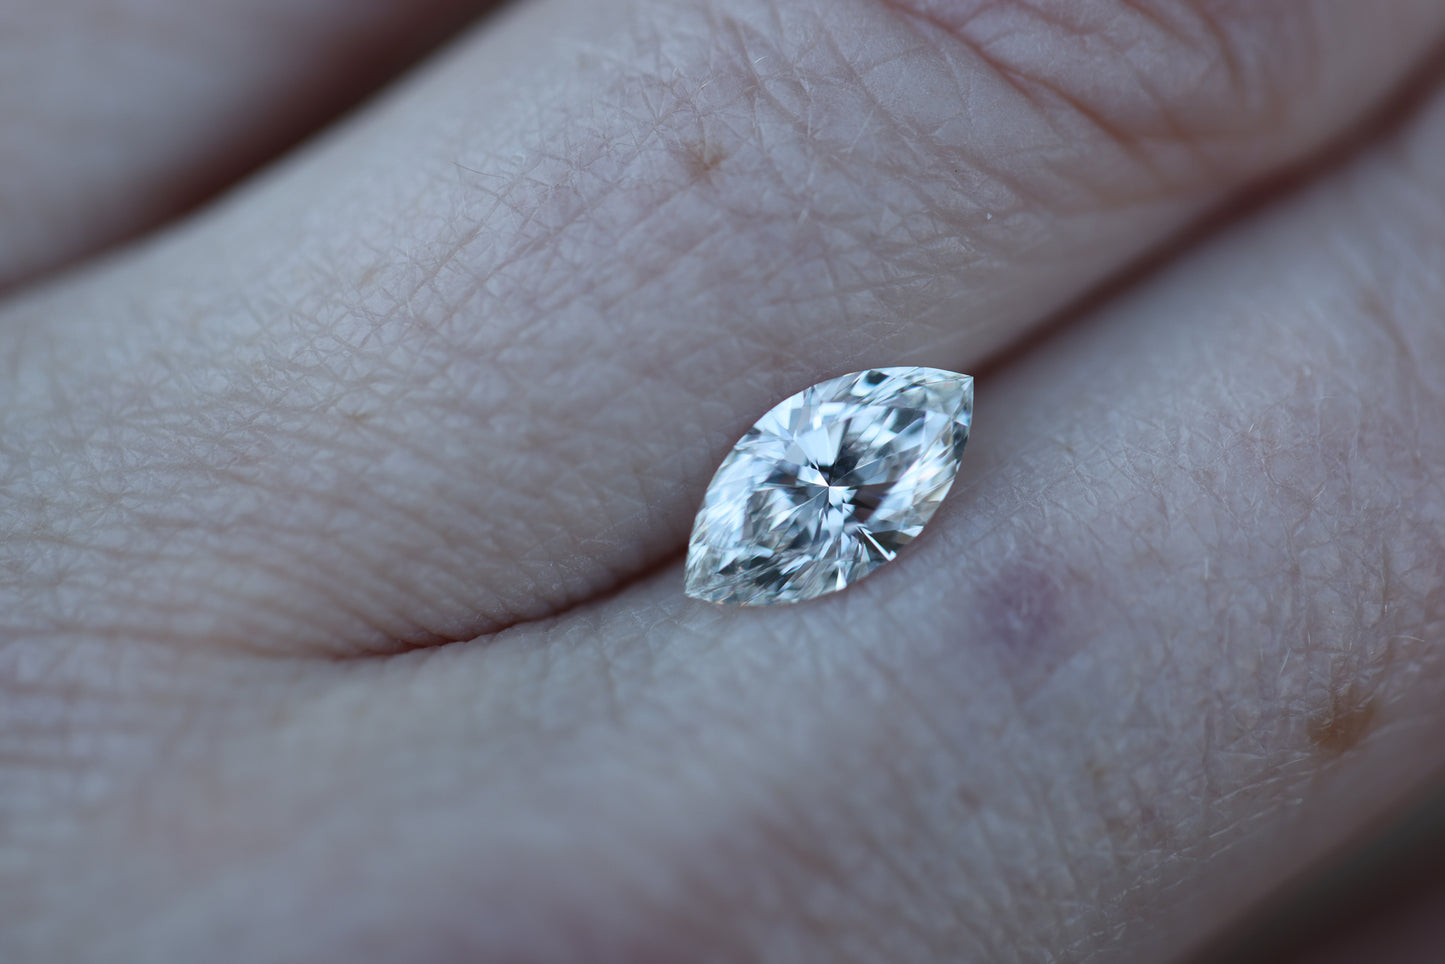 Load image into Gallery viewer, 1.23ct marquise lab diamond, G/VS1
